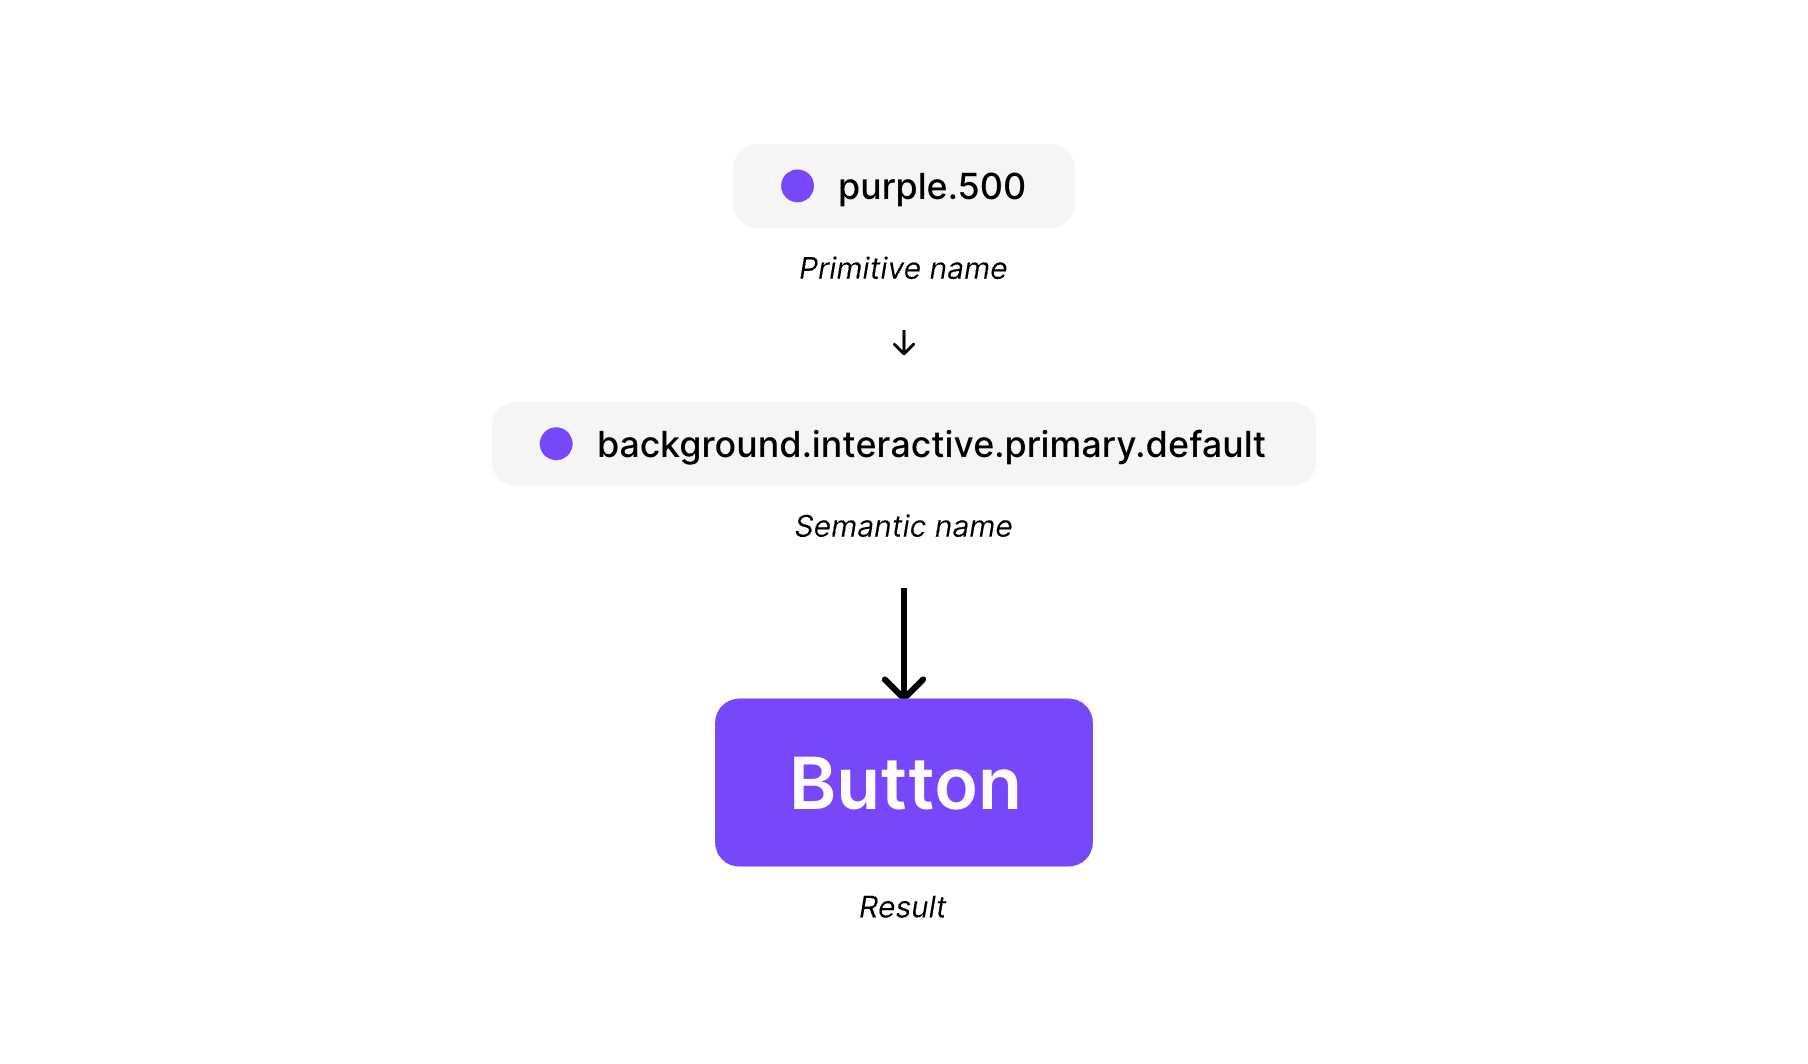 A GIF showing a flow diagram of a primitive color → semantic color → resulting background color of a primary button. The primitive color value is initially purple.500 and it gets changed to green.600 which changes the value of the semantic color and button background color to green.600.